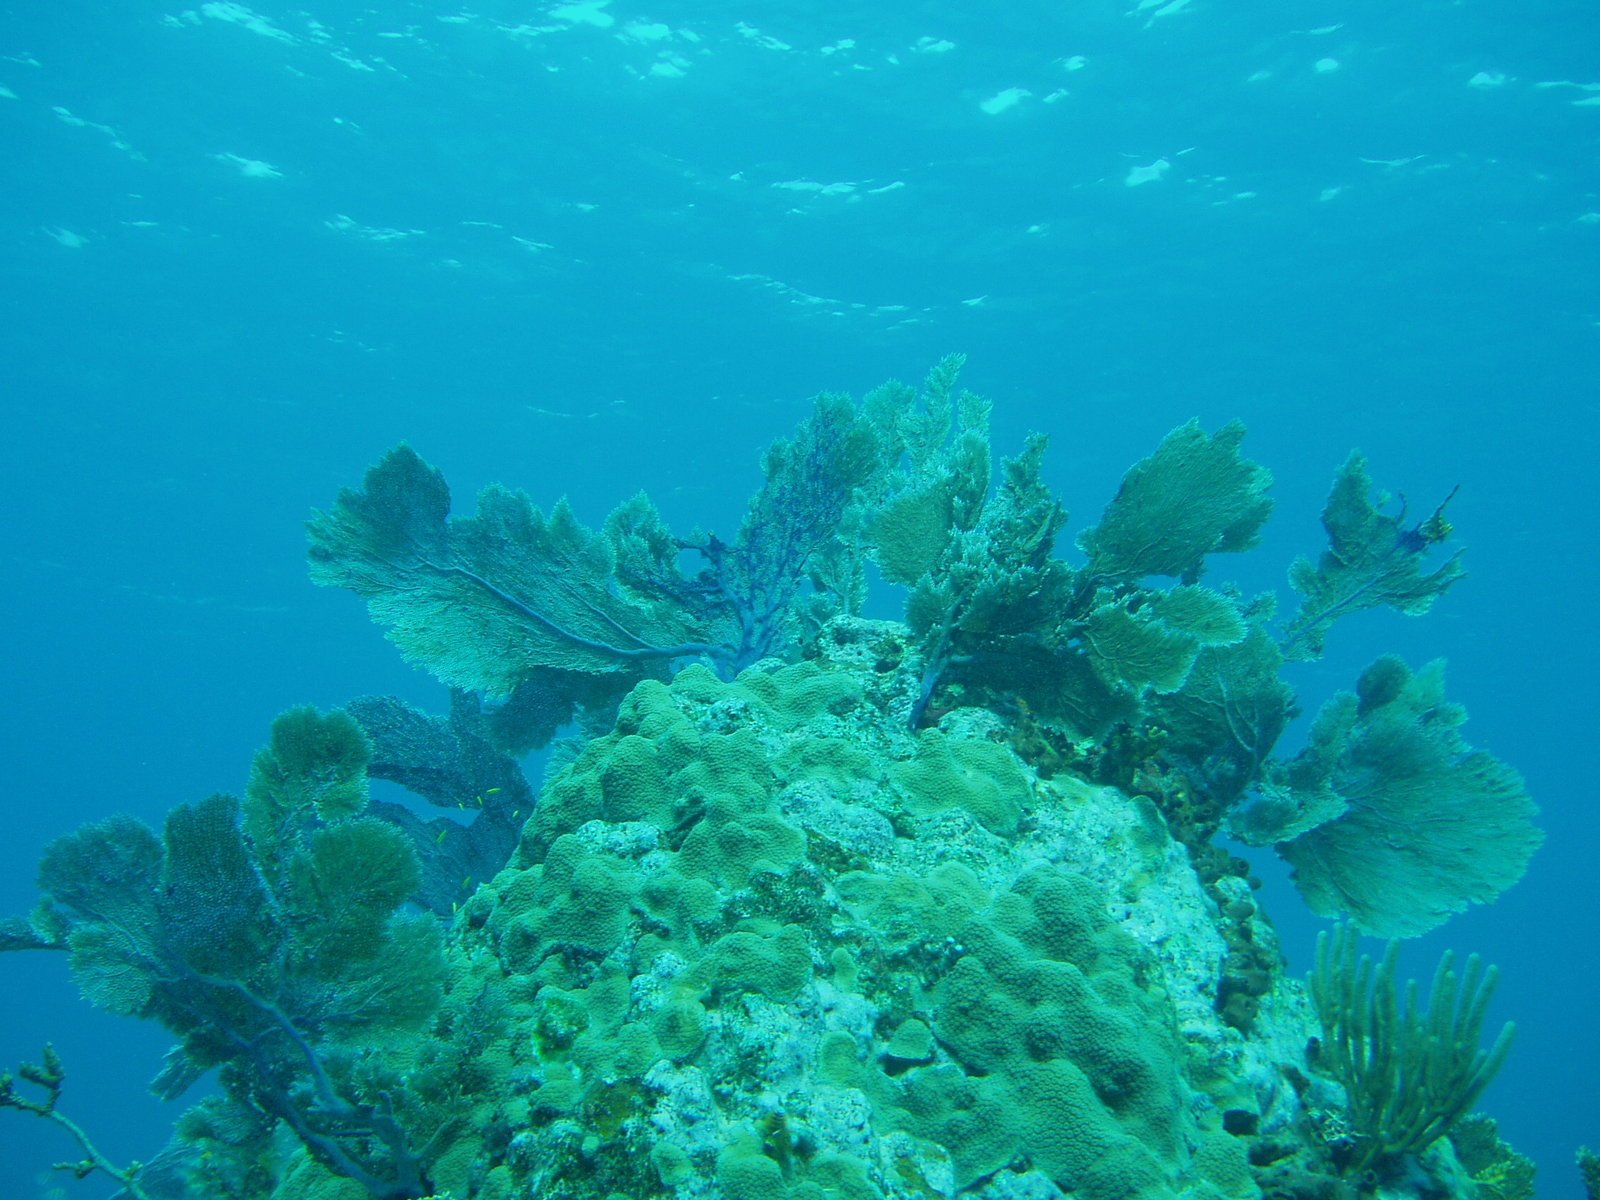 a coral covered with seaweed in the middle of blue water